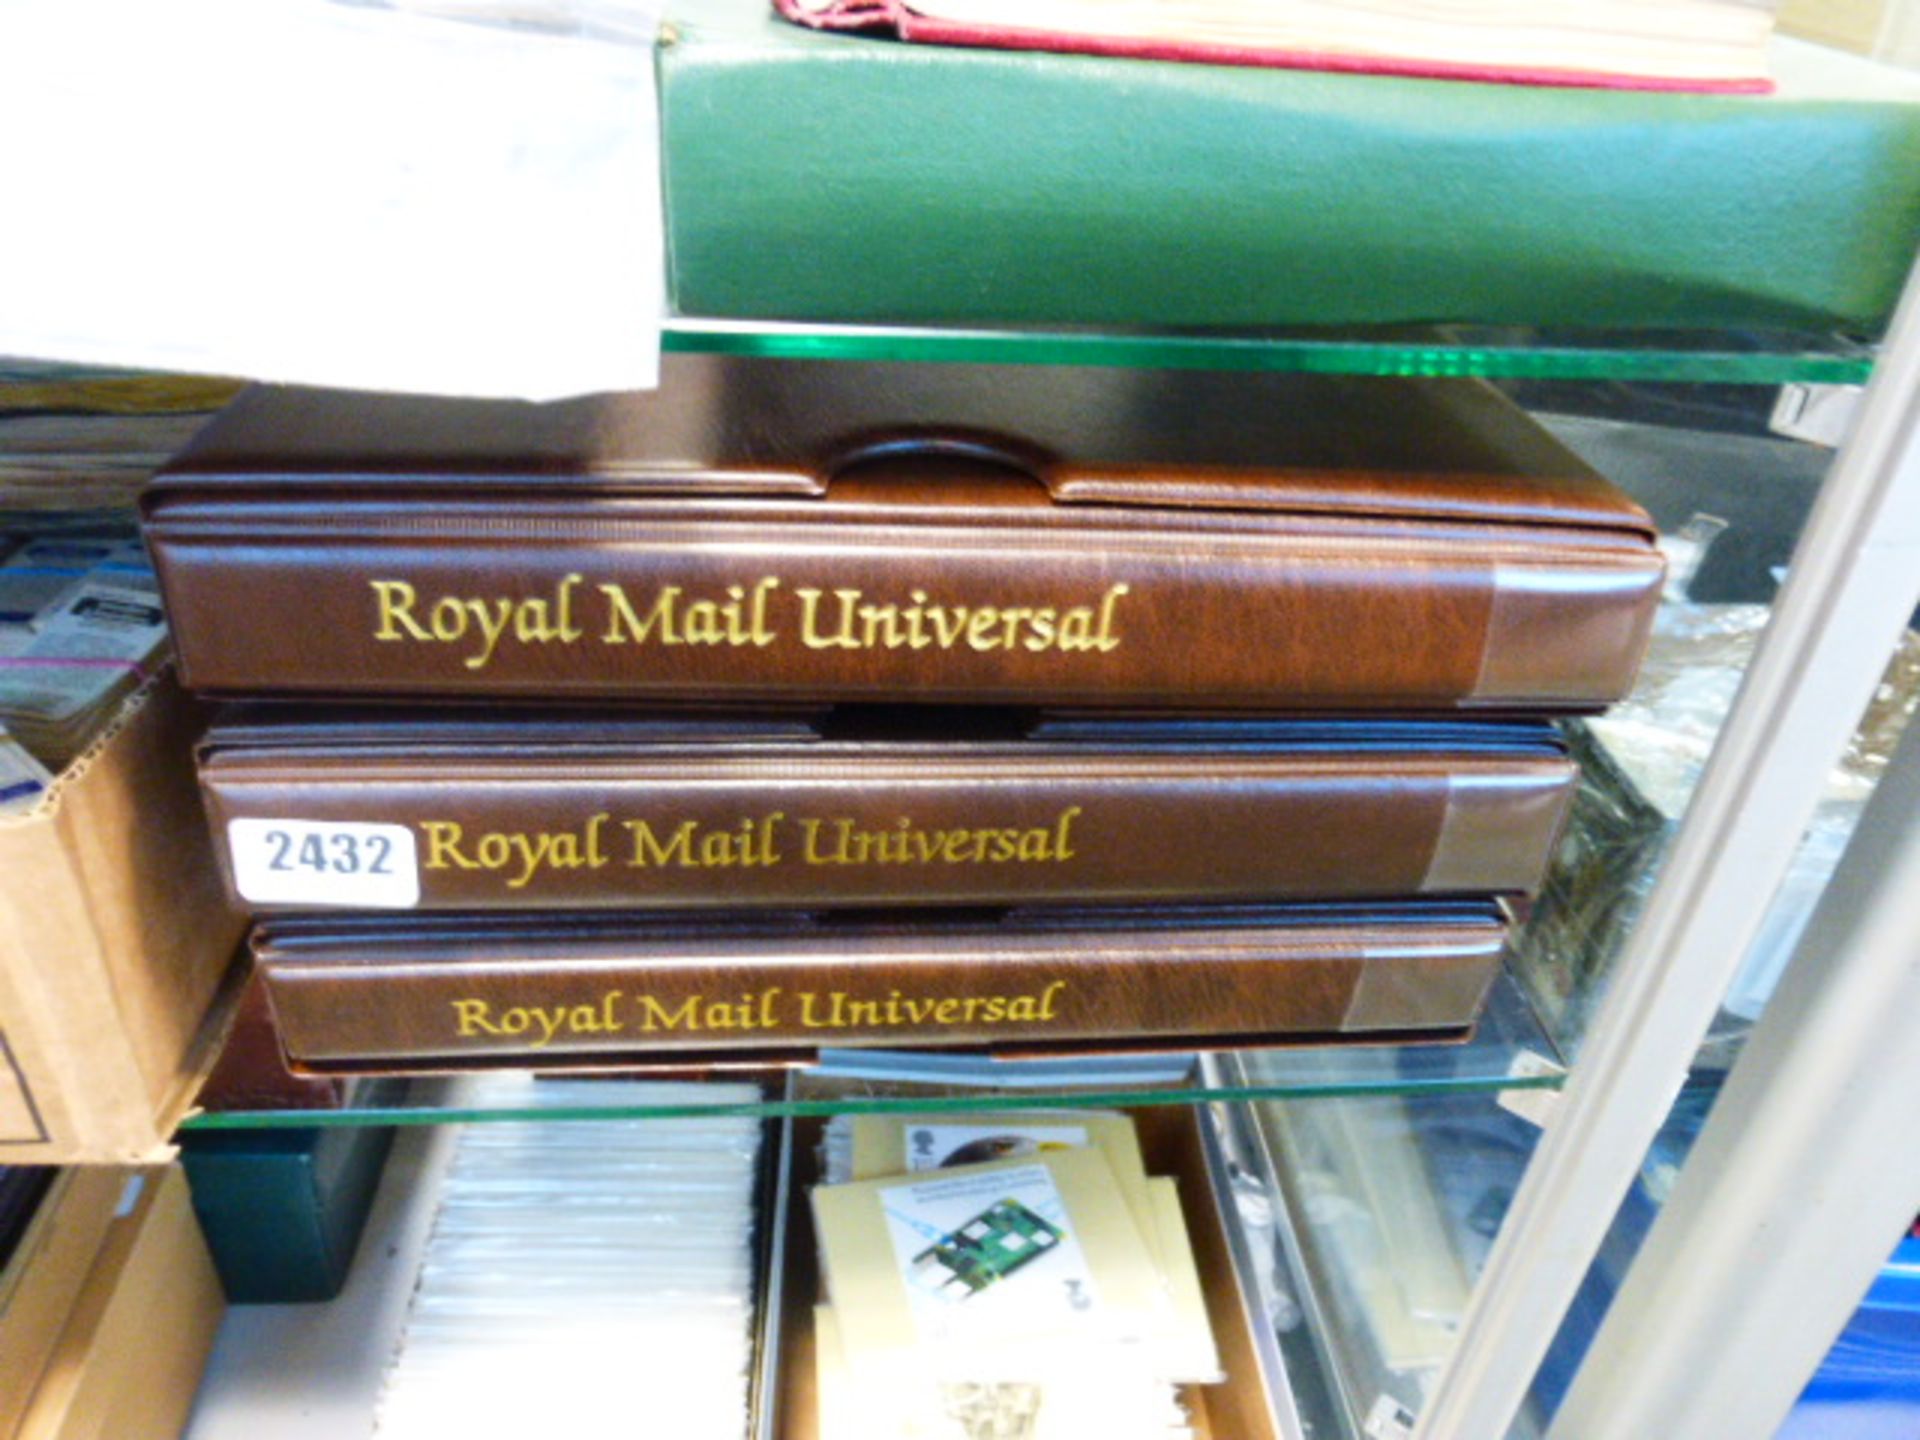 Royal Mail universal stamp album binders with contents